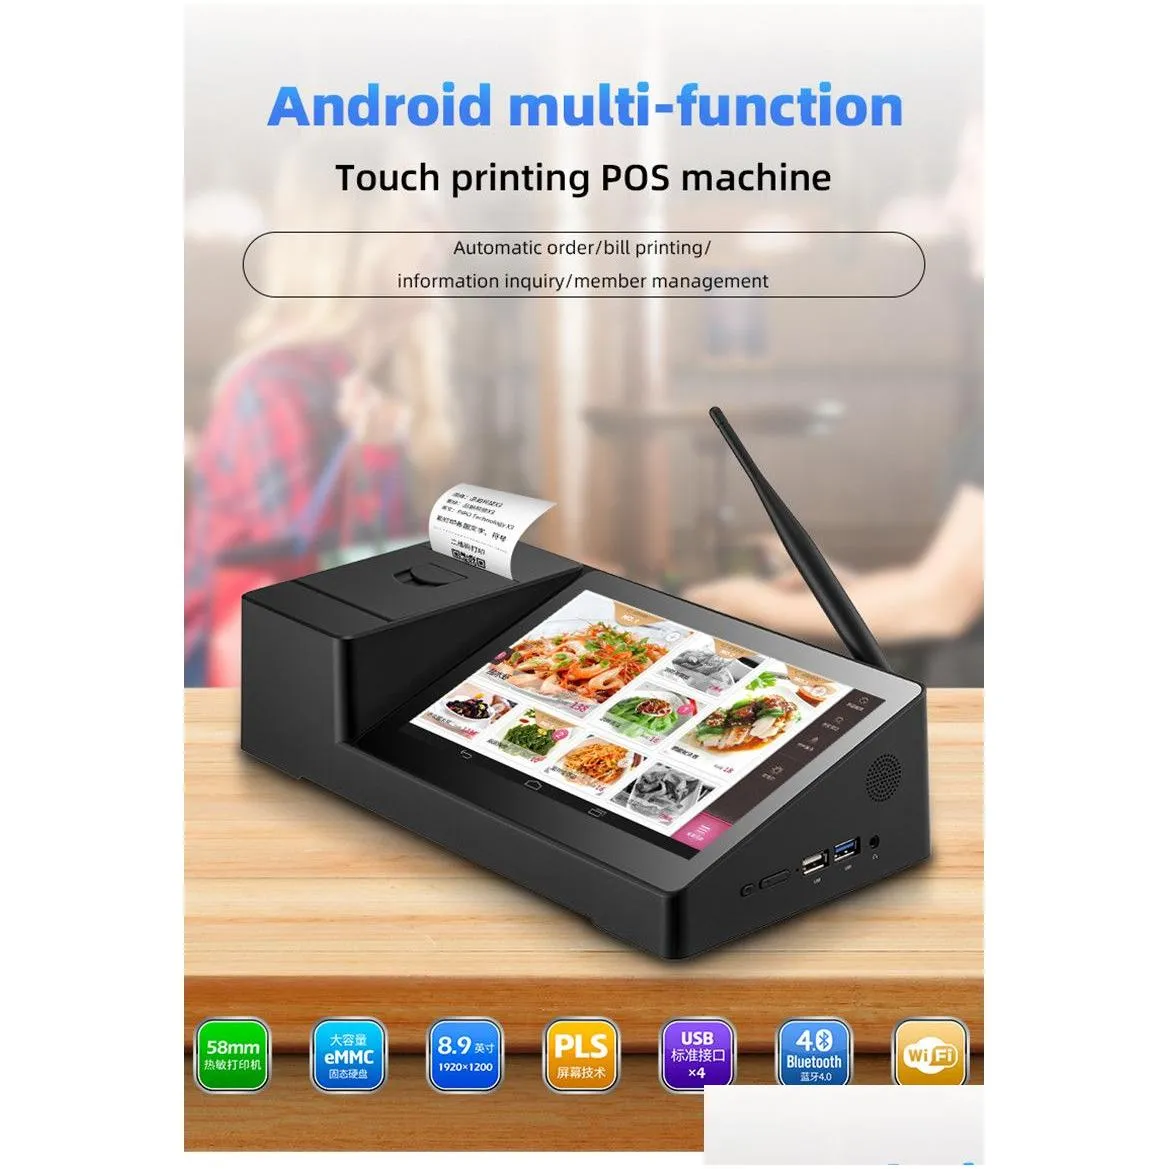 Tablet PC PIPO X3 Multifunction POS with Printer 8.9 inch 1920*1200 2G RAM 32G ROM Android 7.1